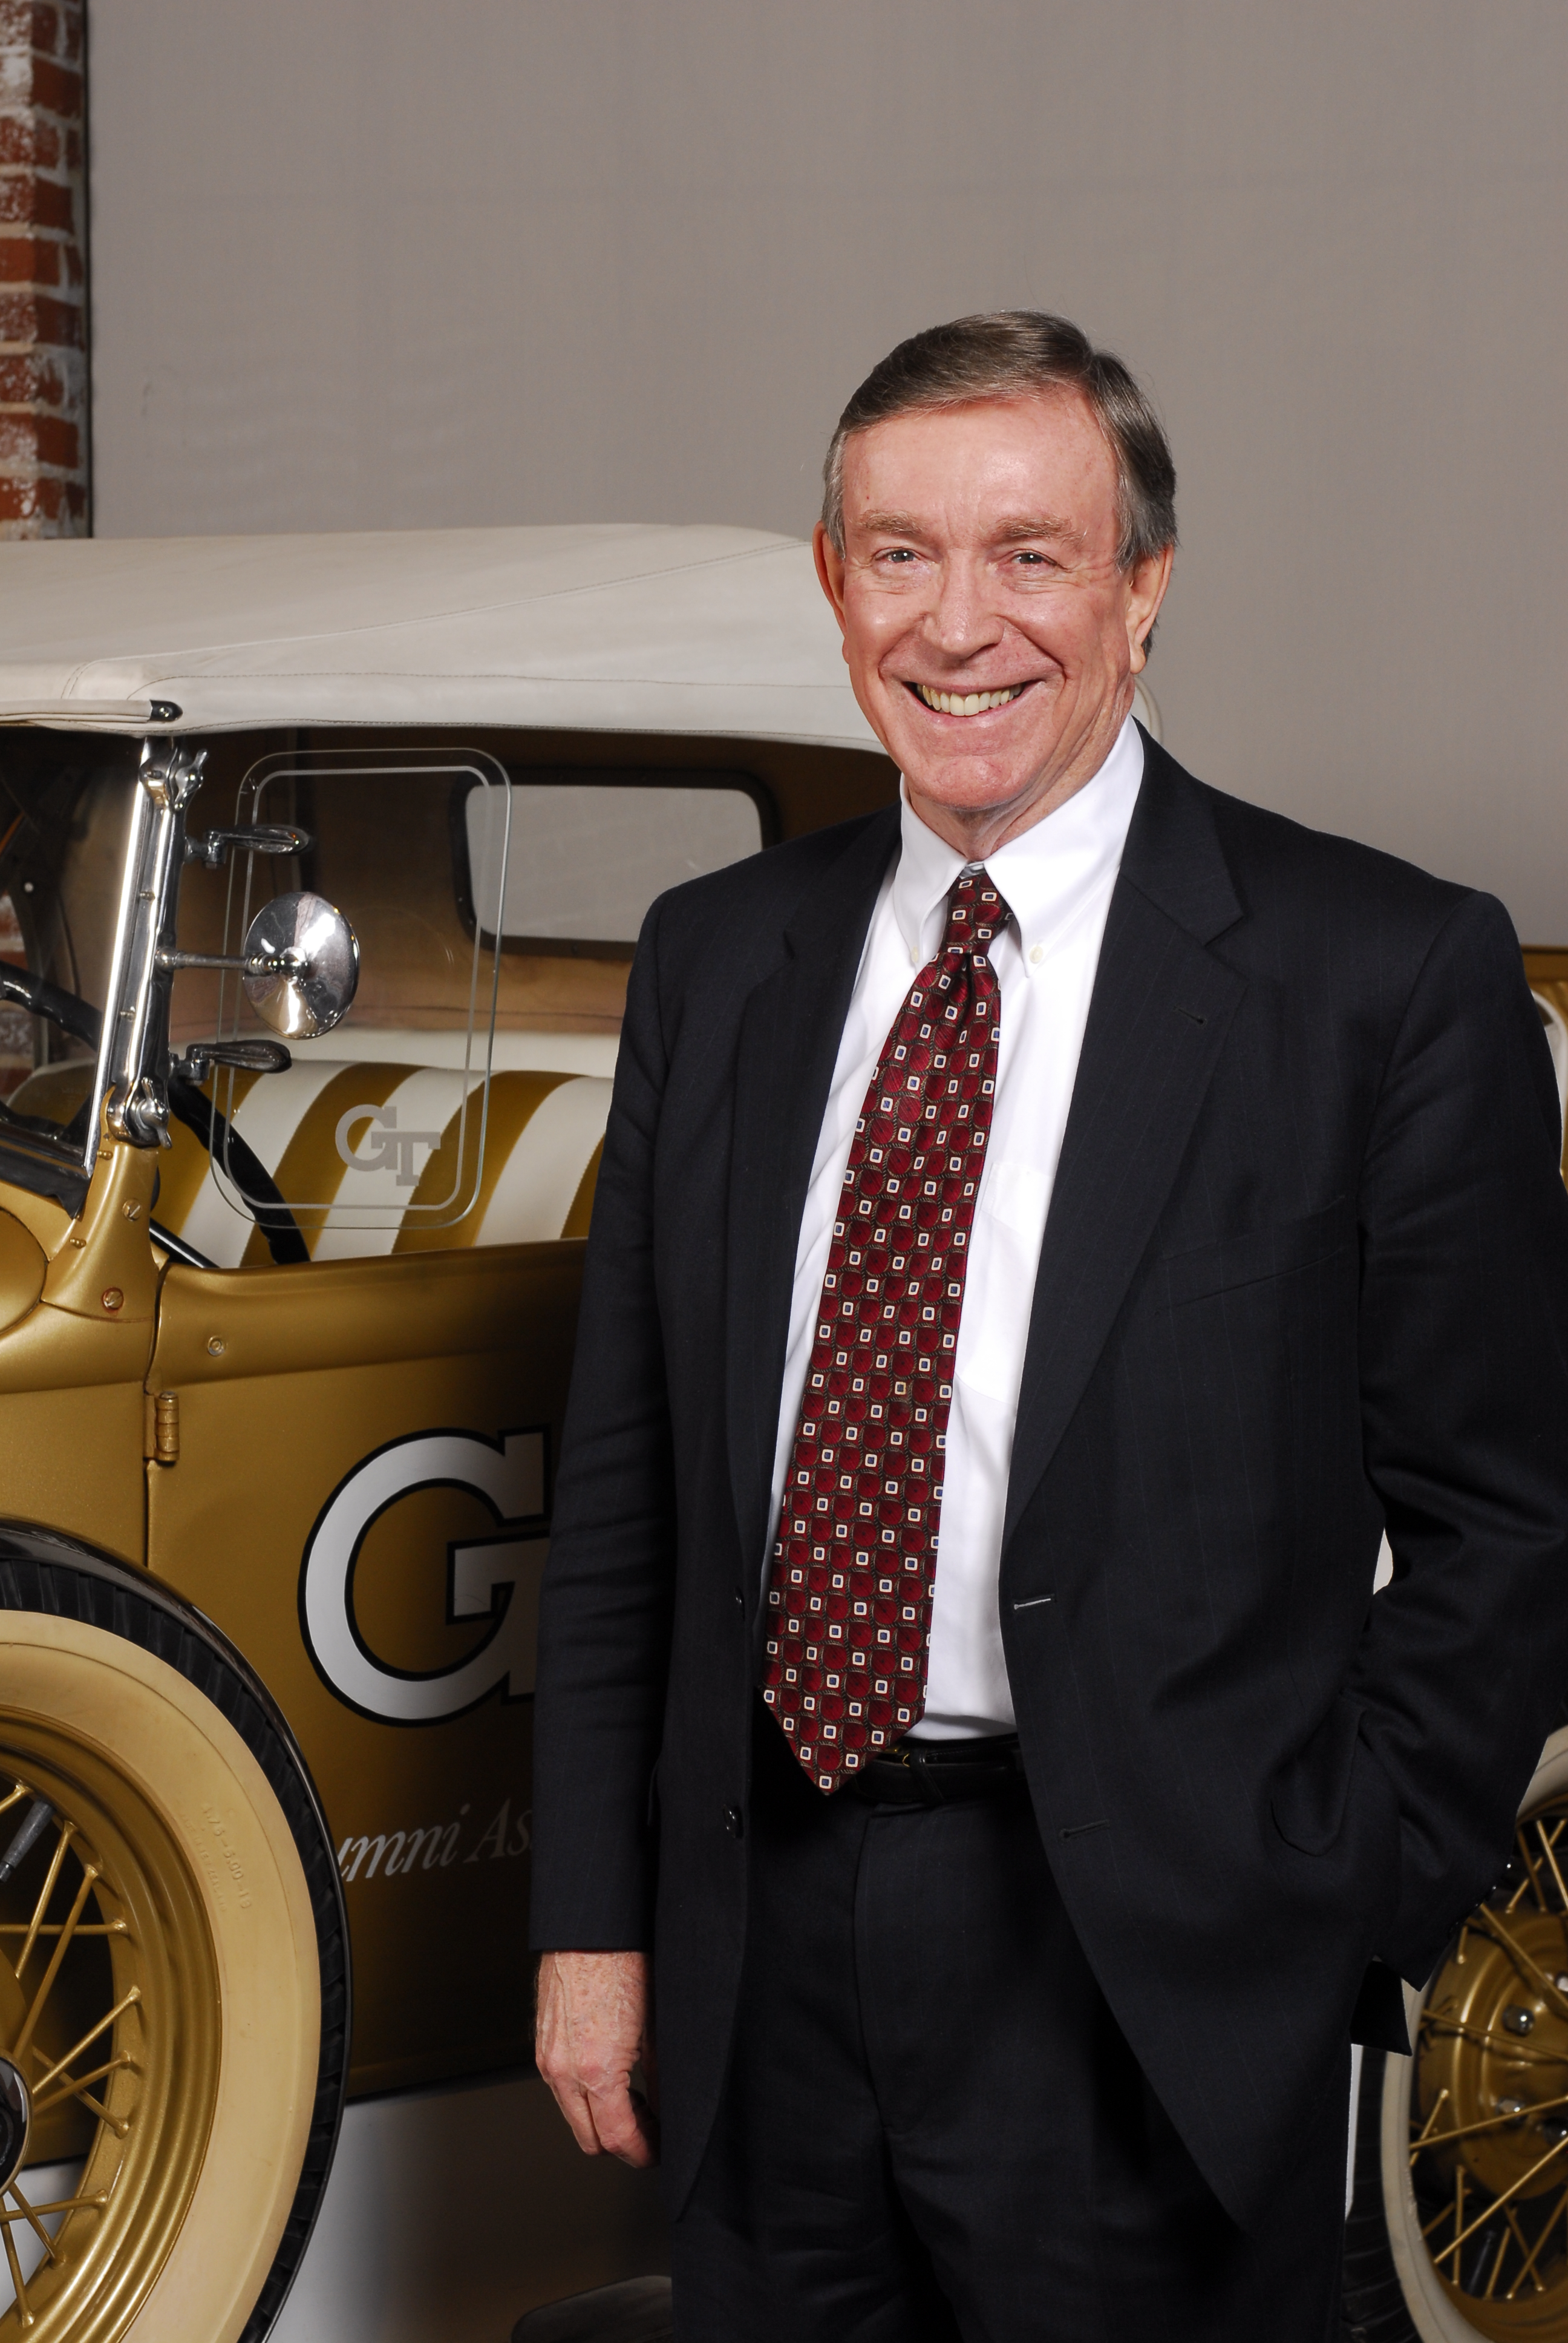 A 1956 Industrial Engineering graduate of Georgia Tech, Ray C. Anderson was a loyal and devoted supporter of his alma mater for more than five decades. A champion of sustainability, he was awarded an honorary doctorate from the Institute in 2011.